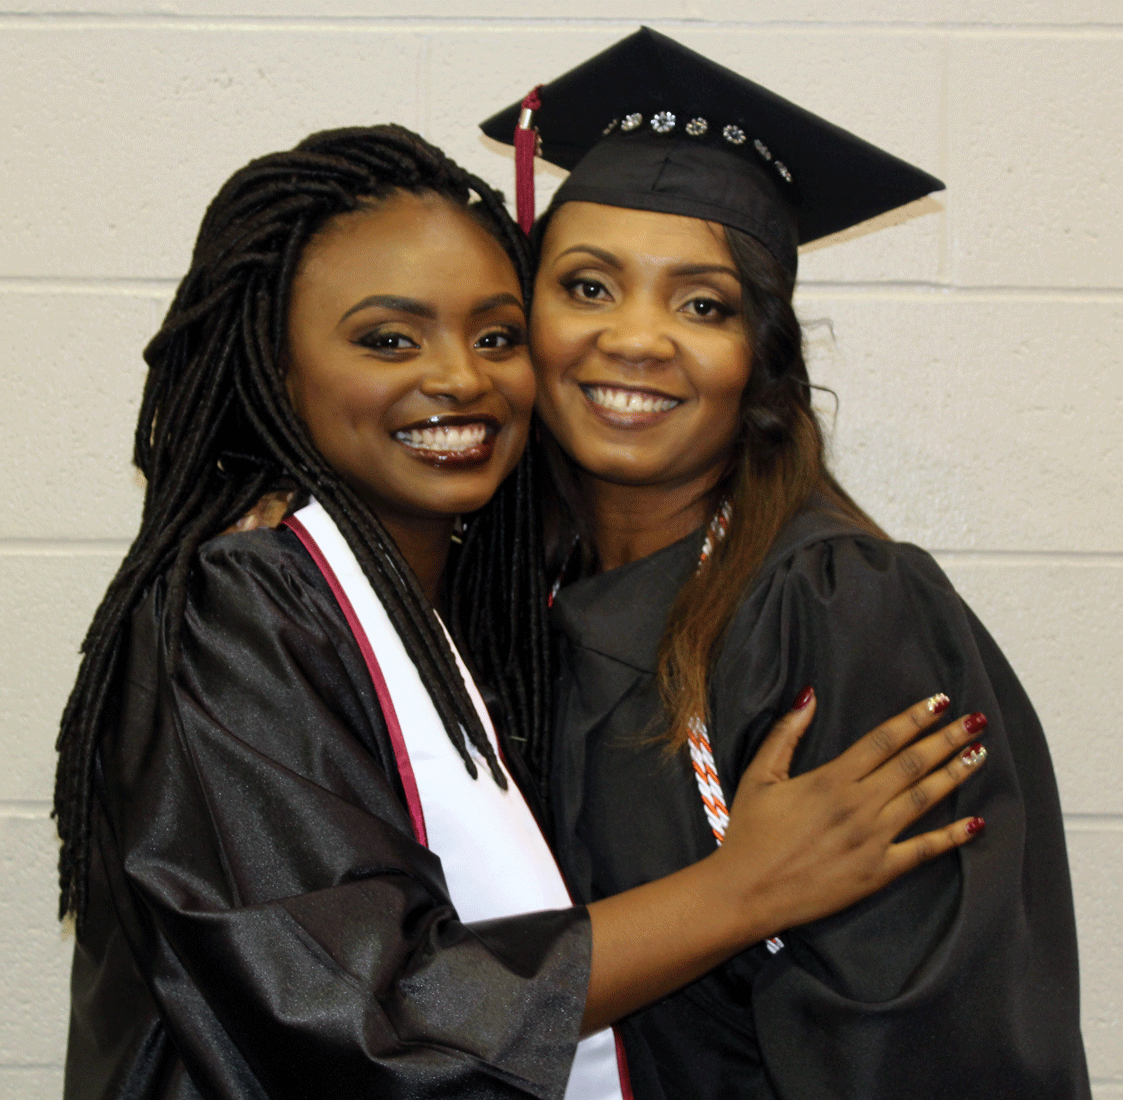 Arial King (left) hugs her mother, Pamala Stanley (right), during their graduation from the University of Arkansas at Little Rock May 14 at Jack Stephens Center.